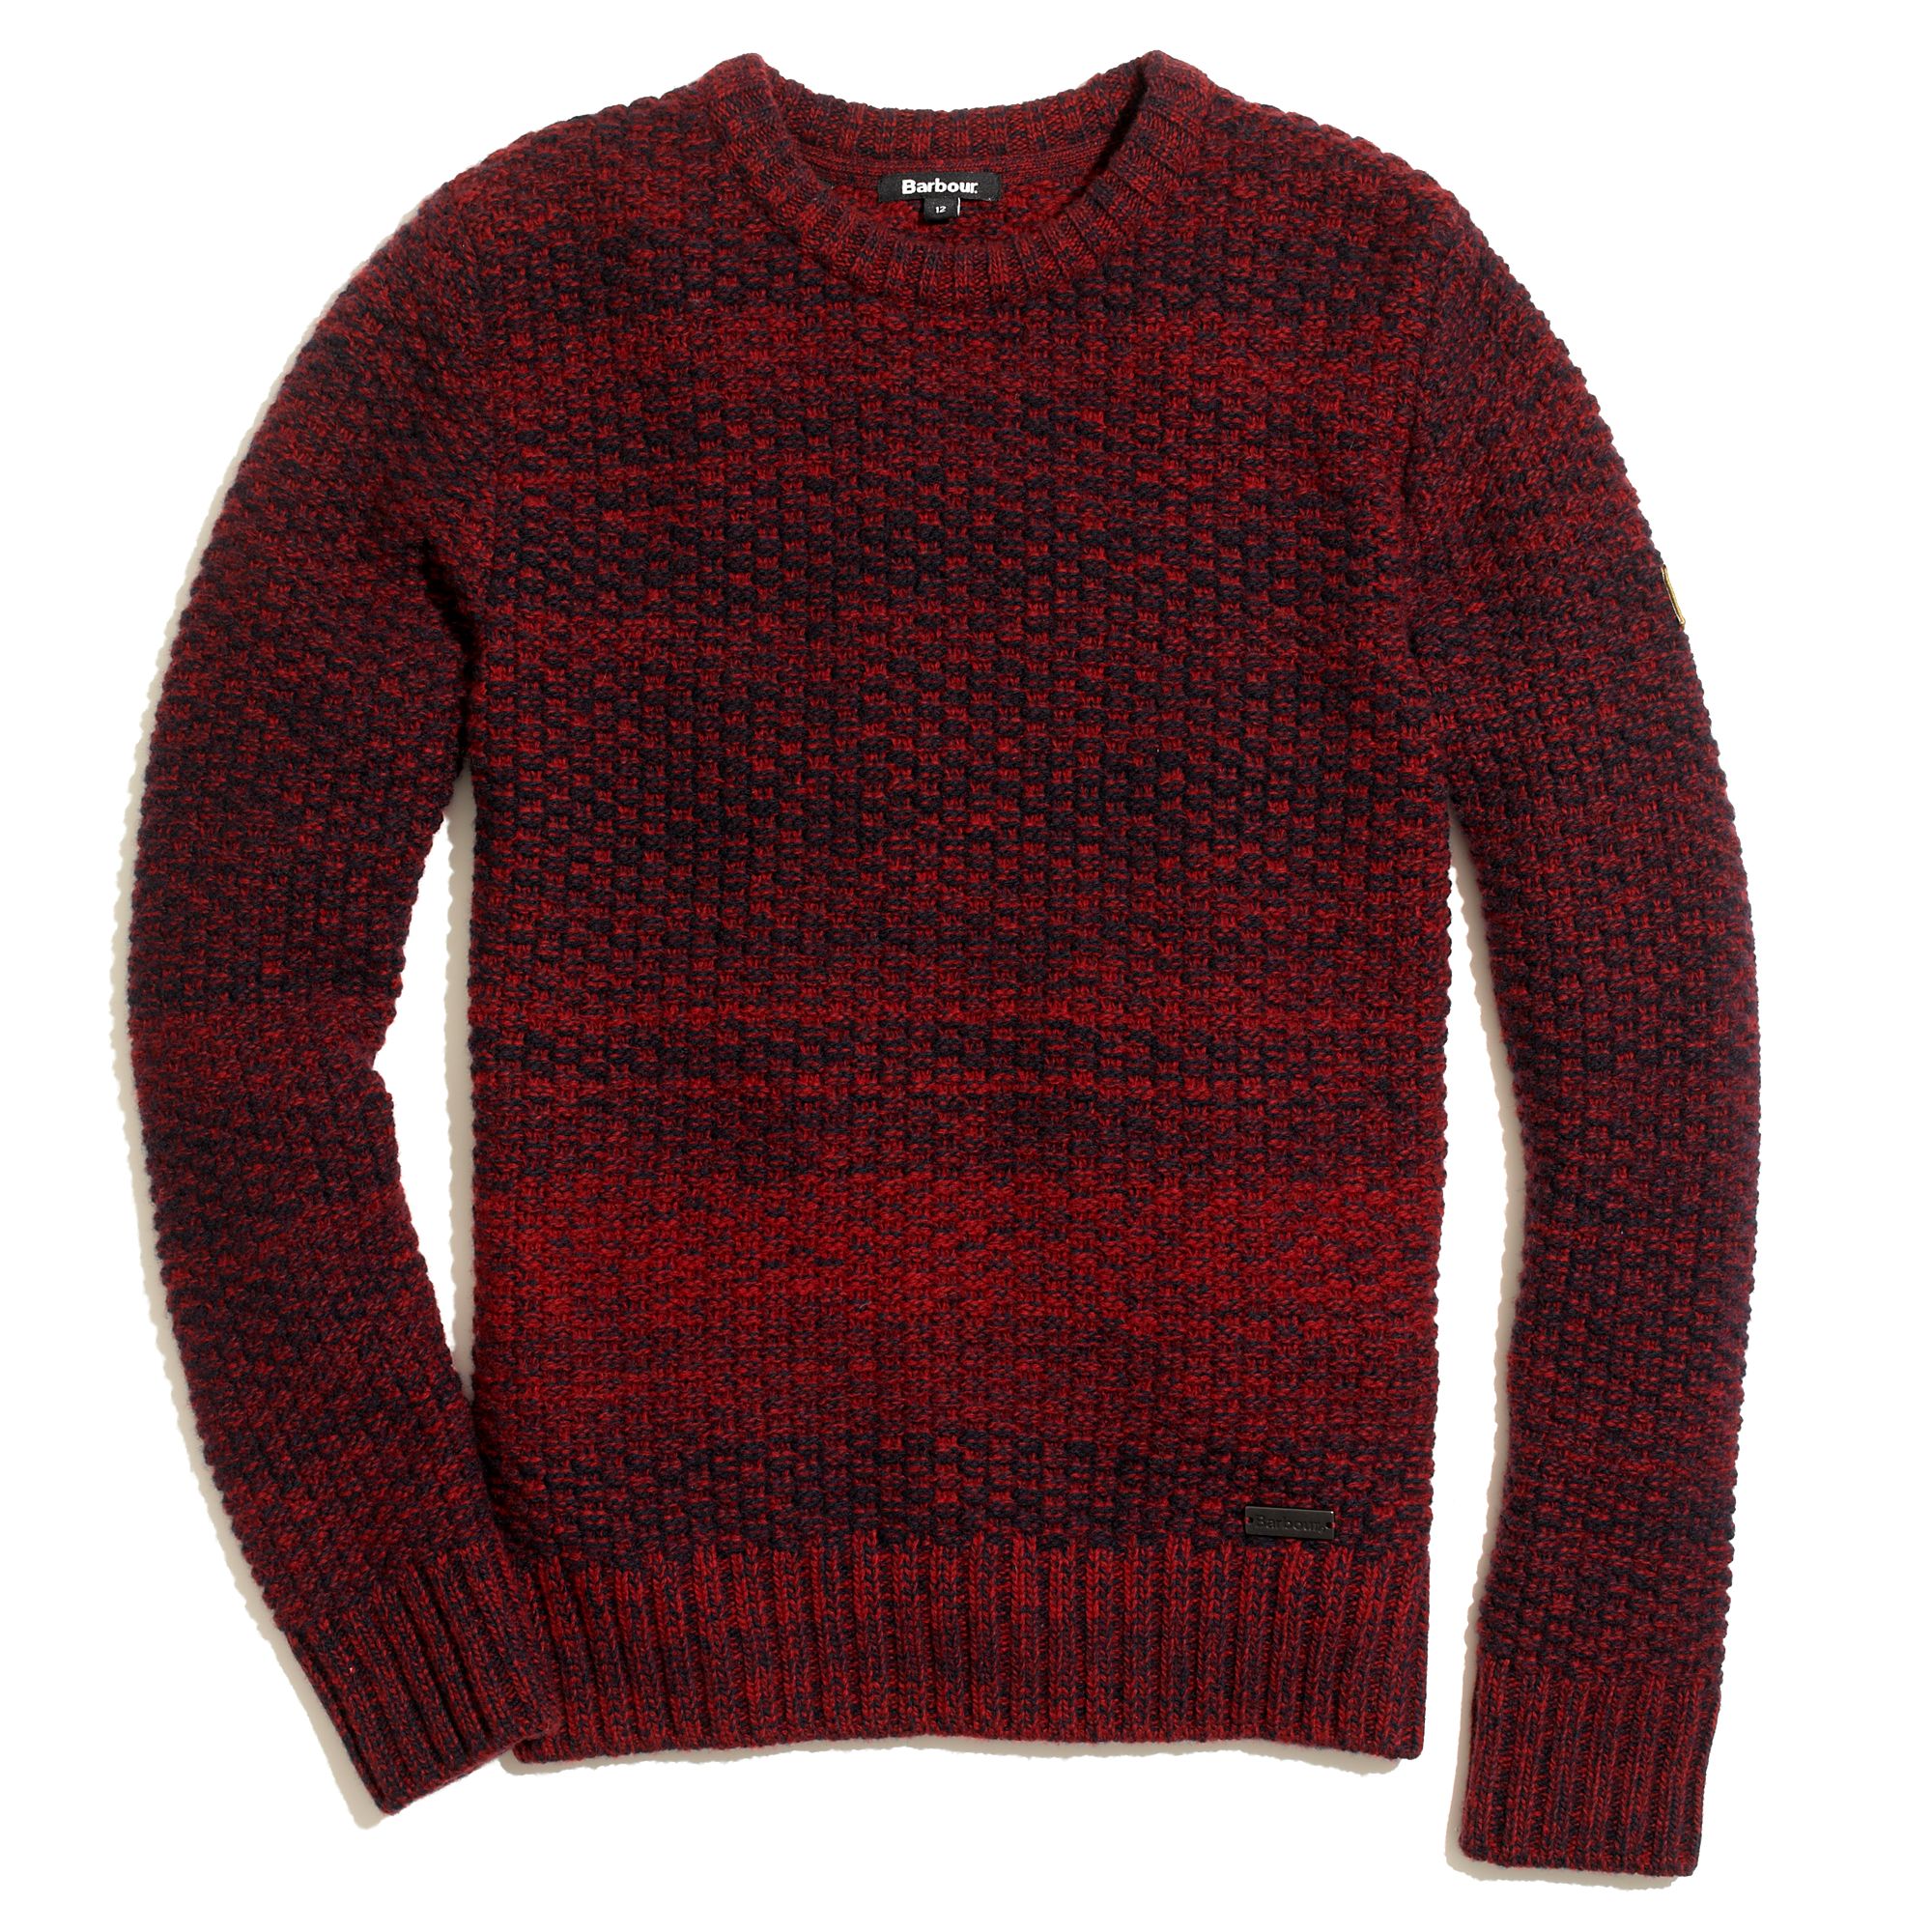 Madewell Barbourreg Danby Marled Sweater in Red | Lyst